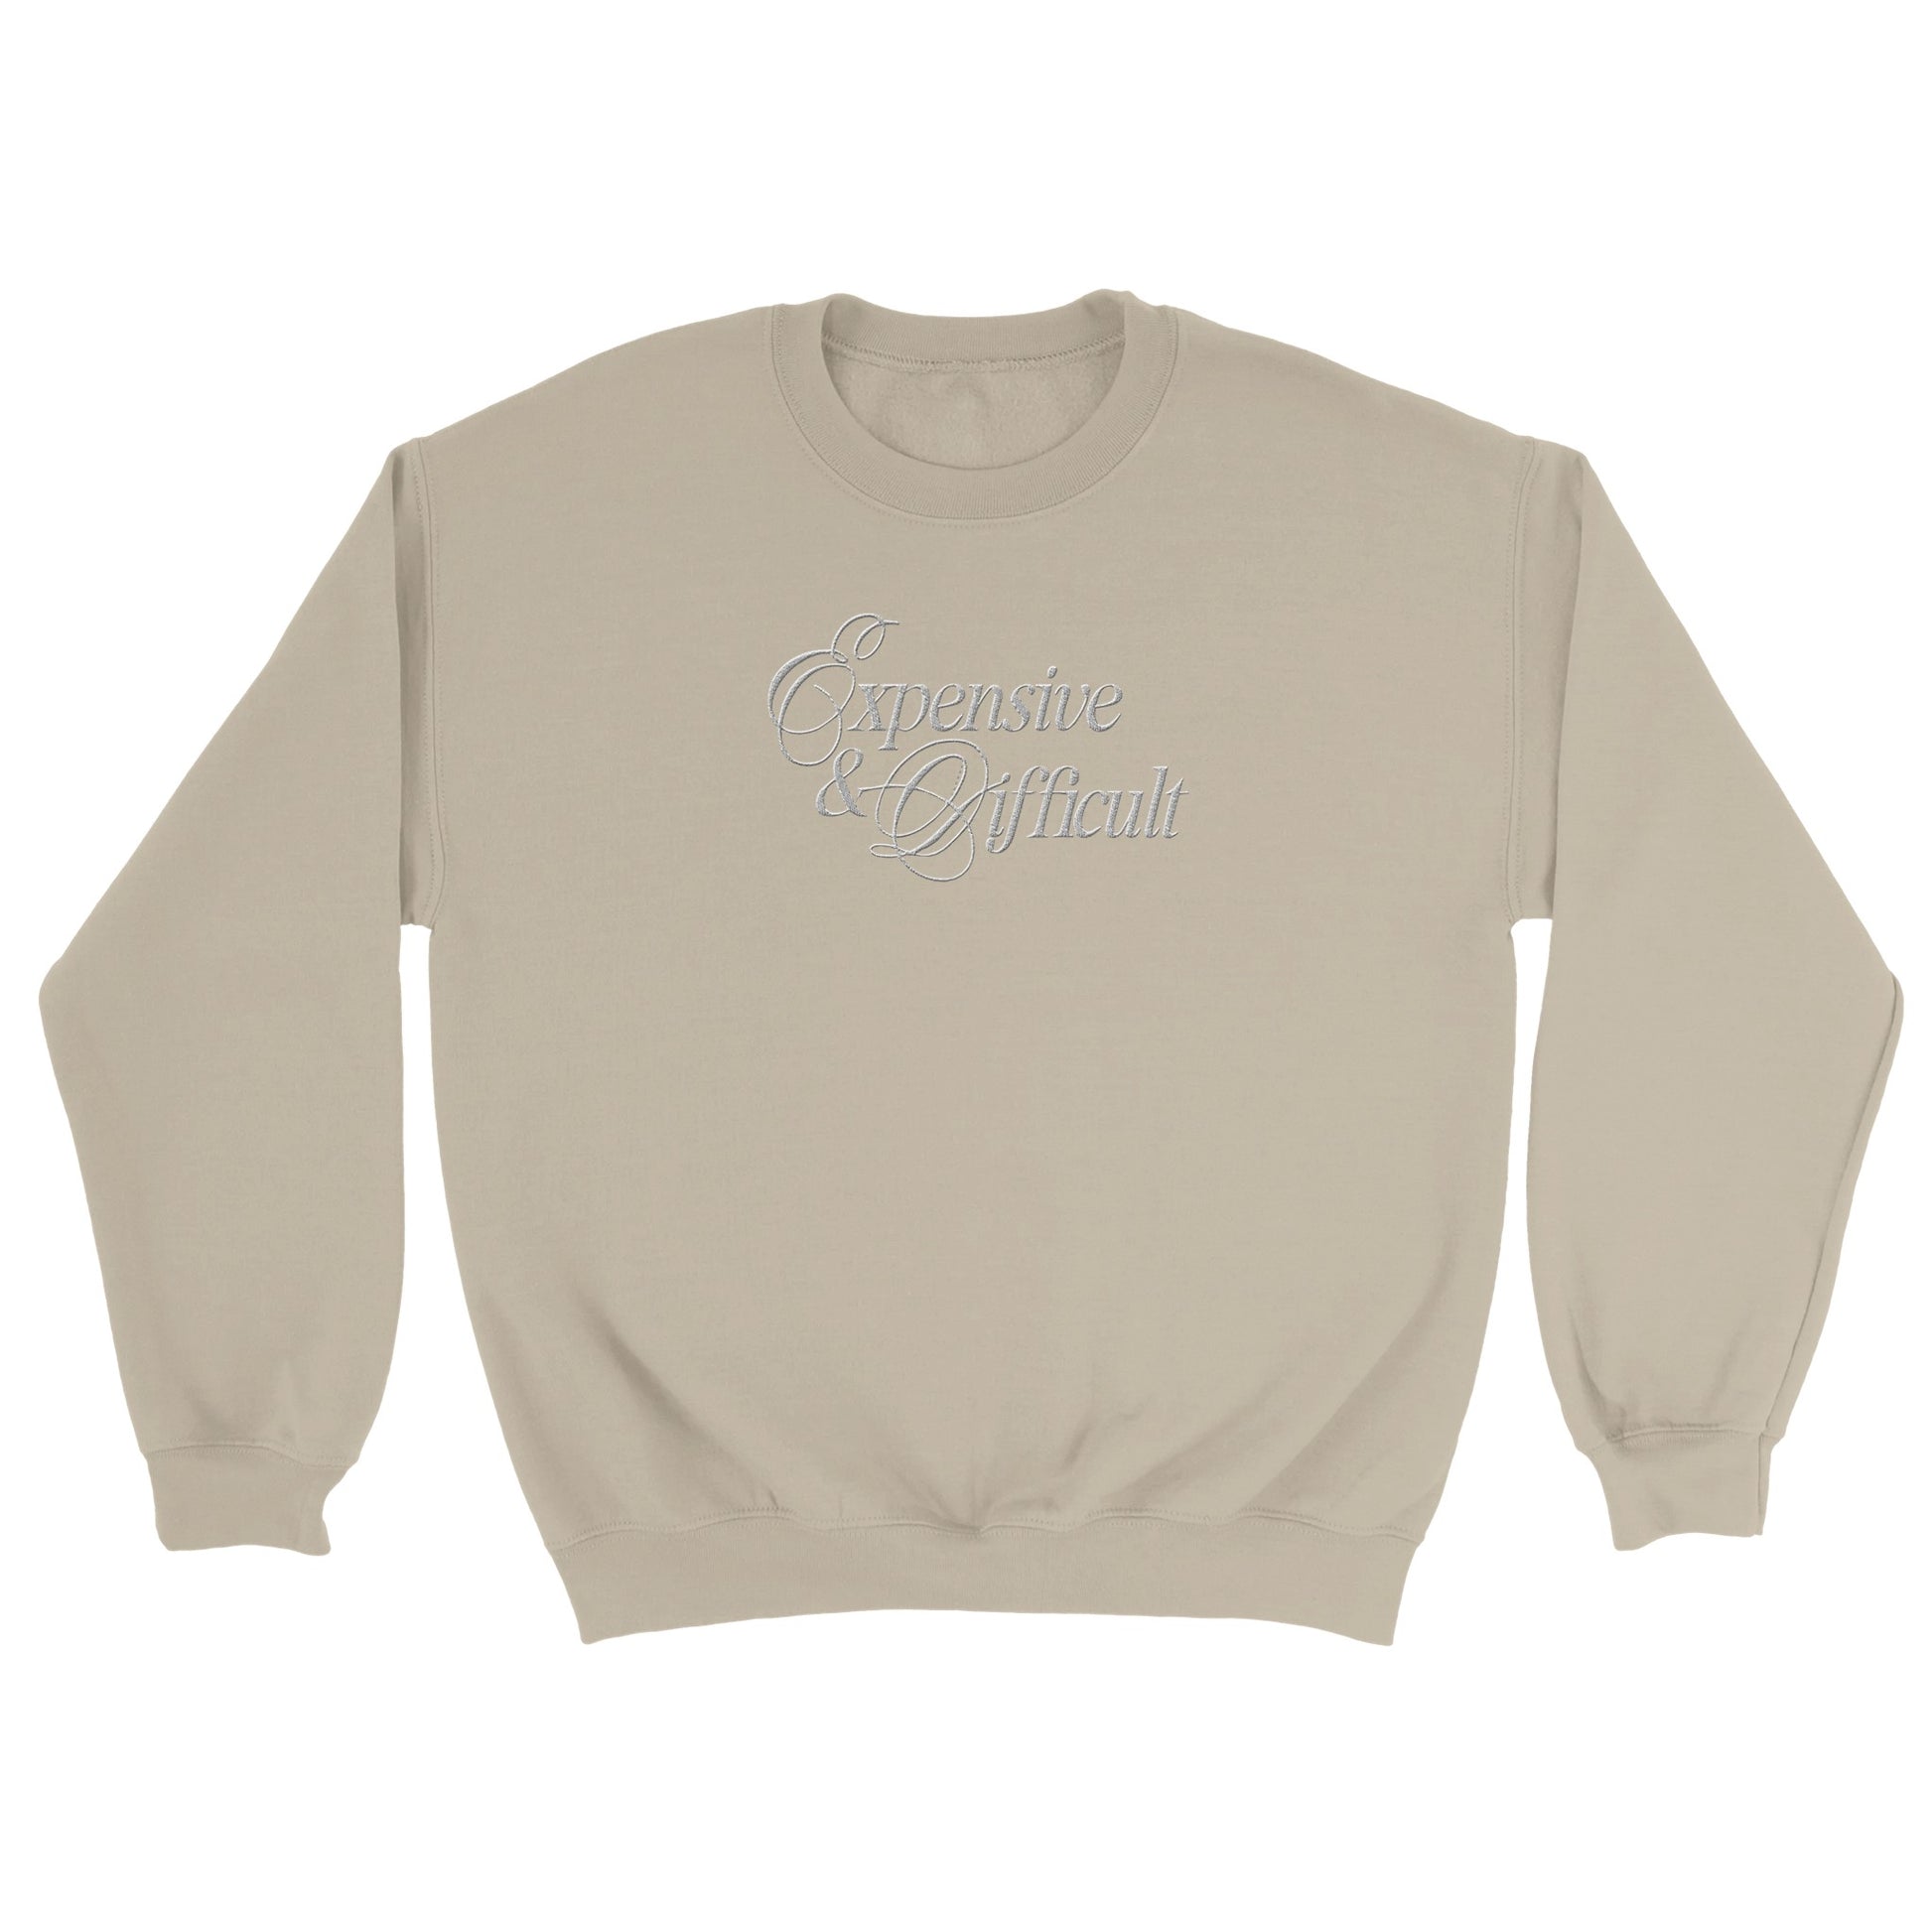 expensive and difficult embroidered on a beige sweatshirt